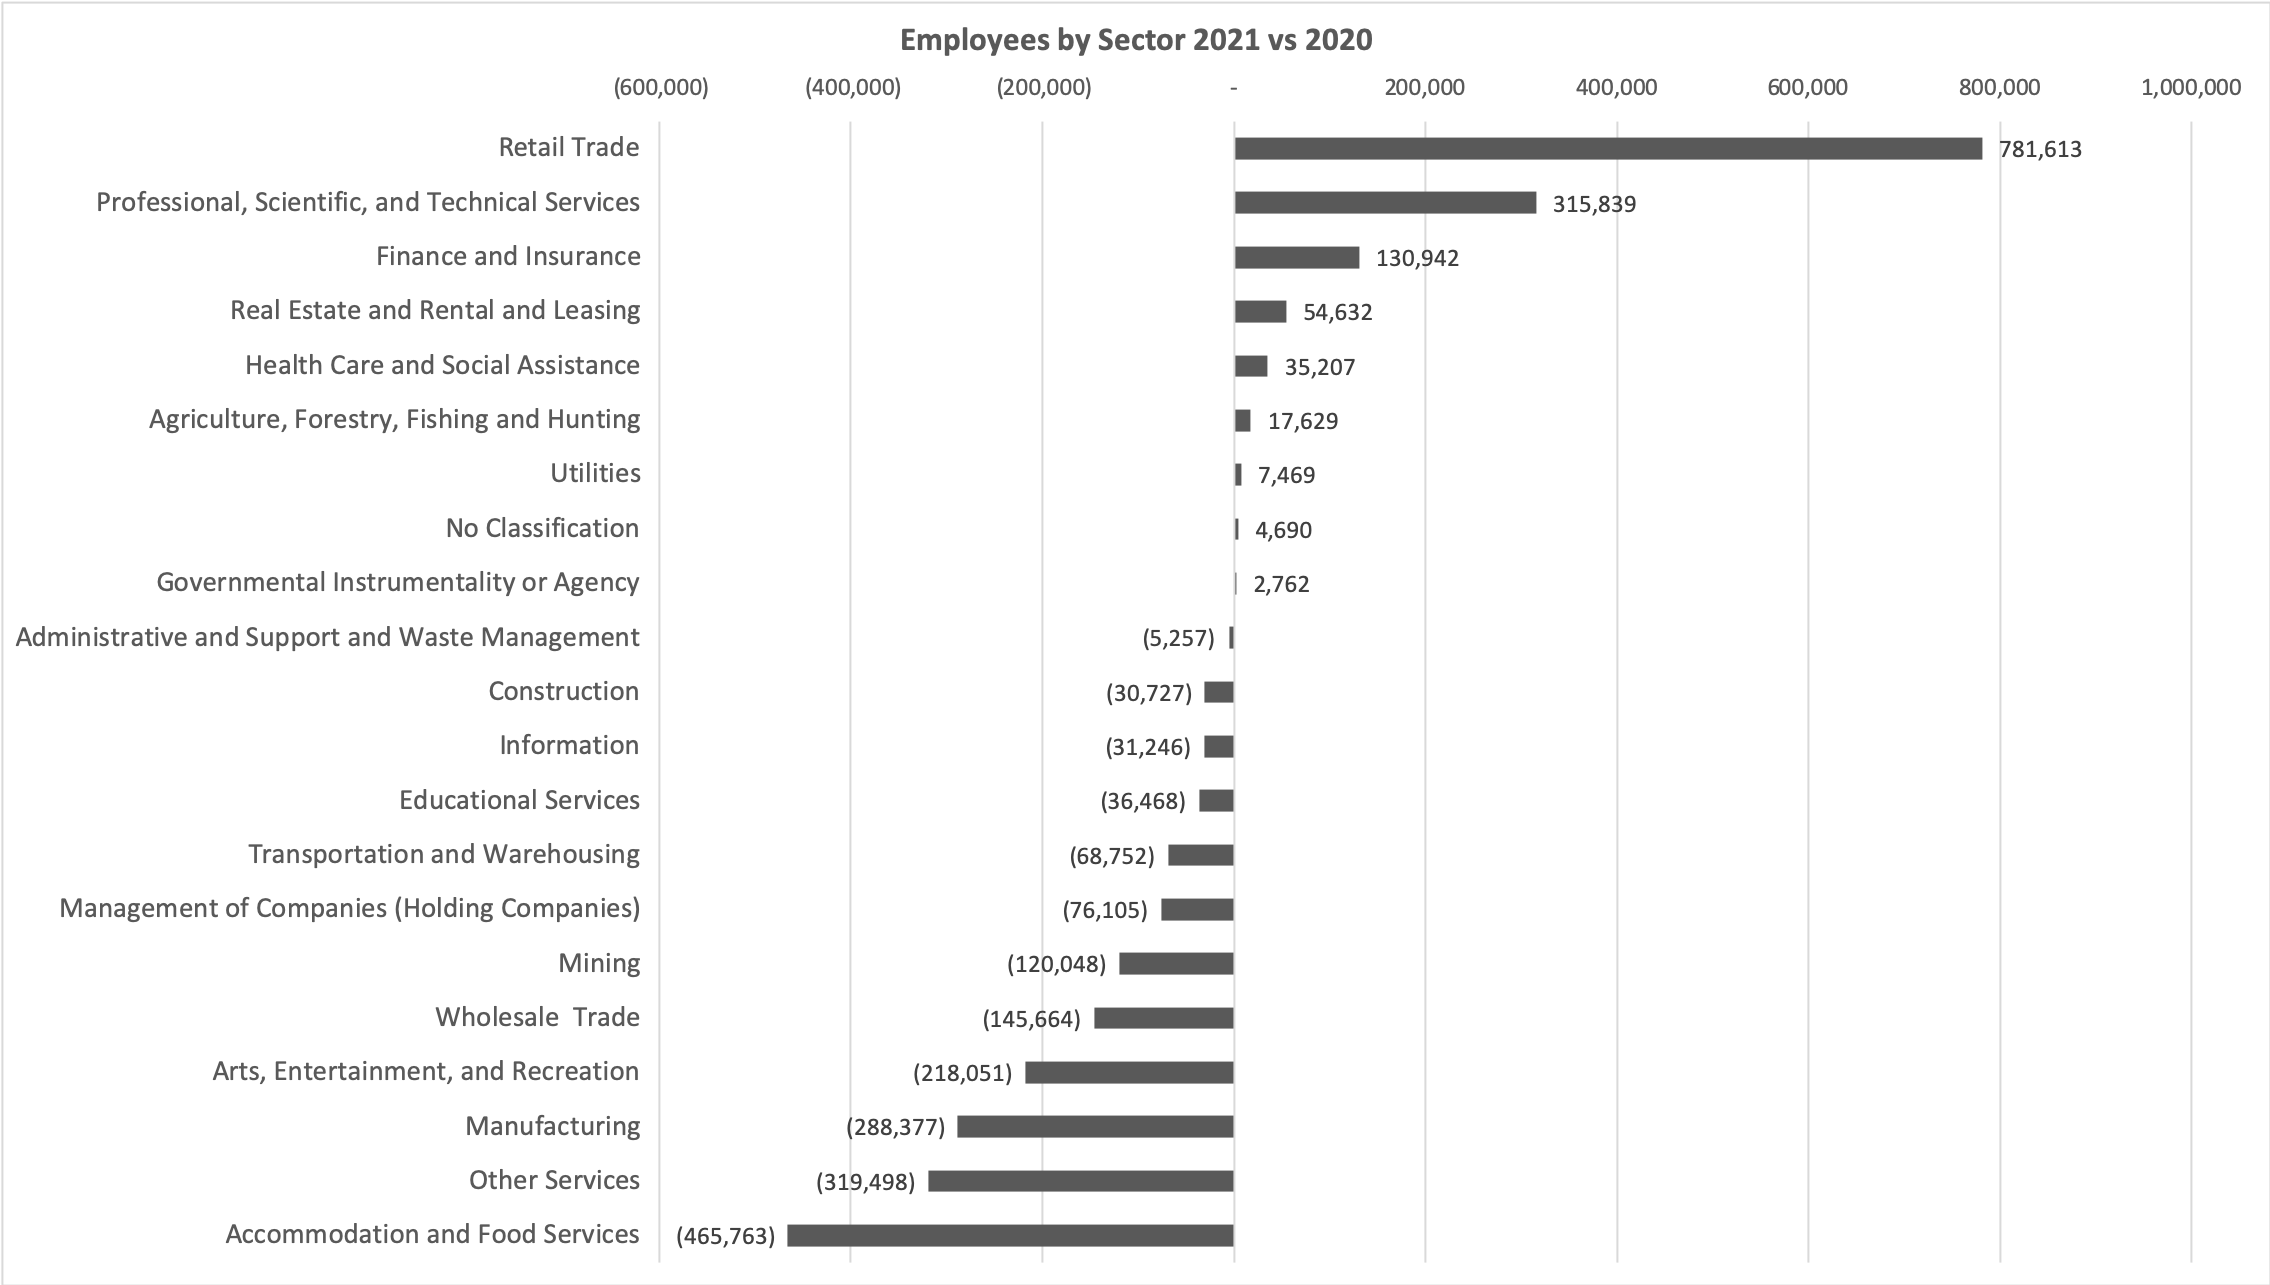 03 number of active employees per sector 2020 2021